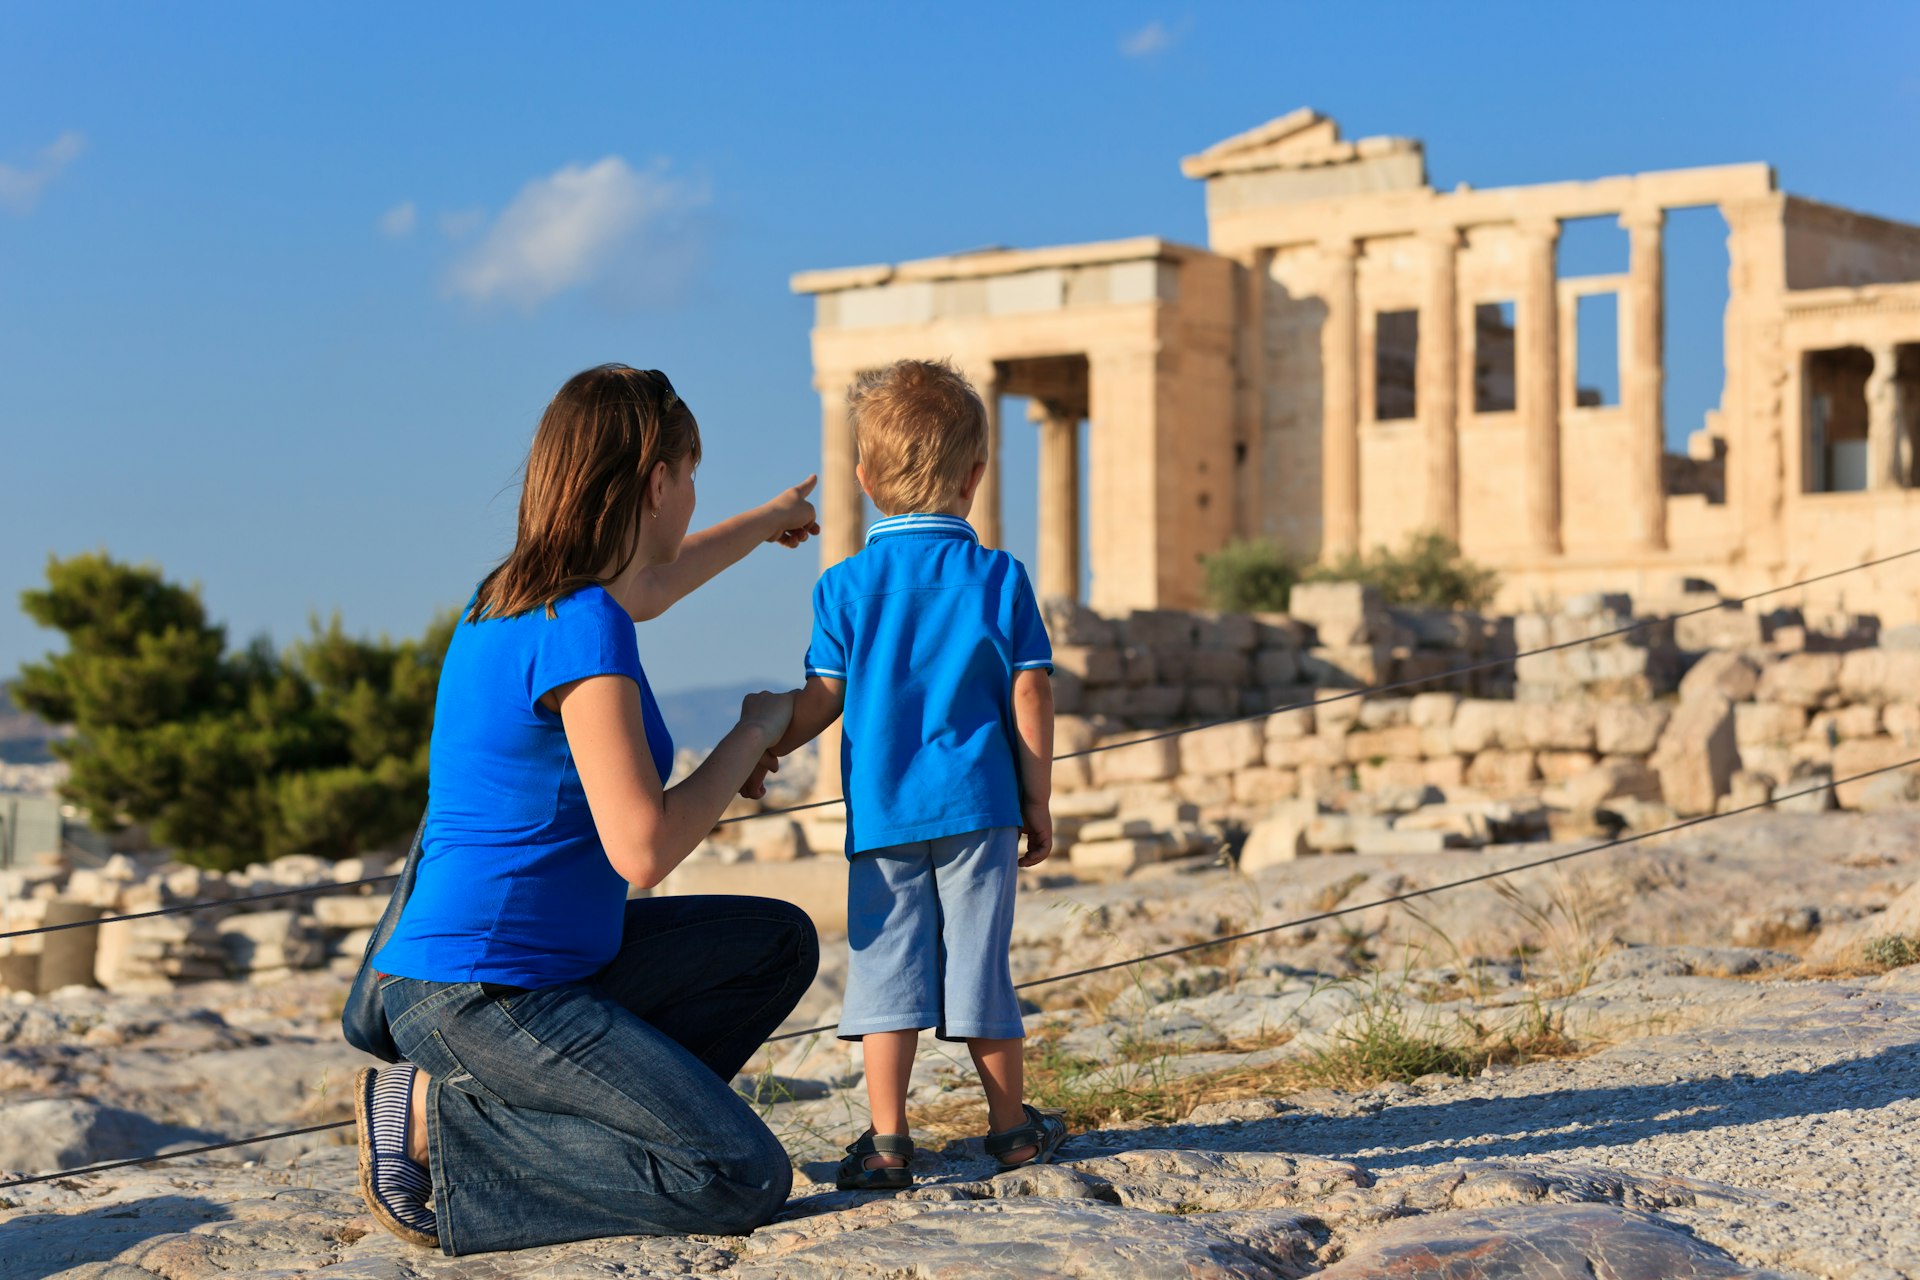 A mother showing her young son the acropolis in Athens, Greece, on a sunny day